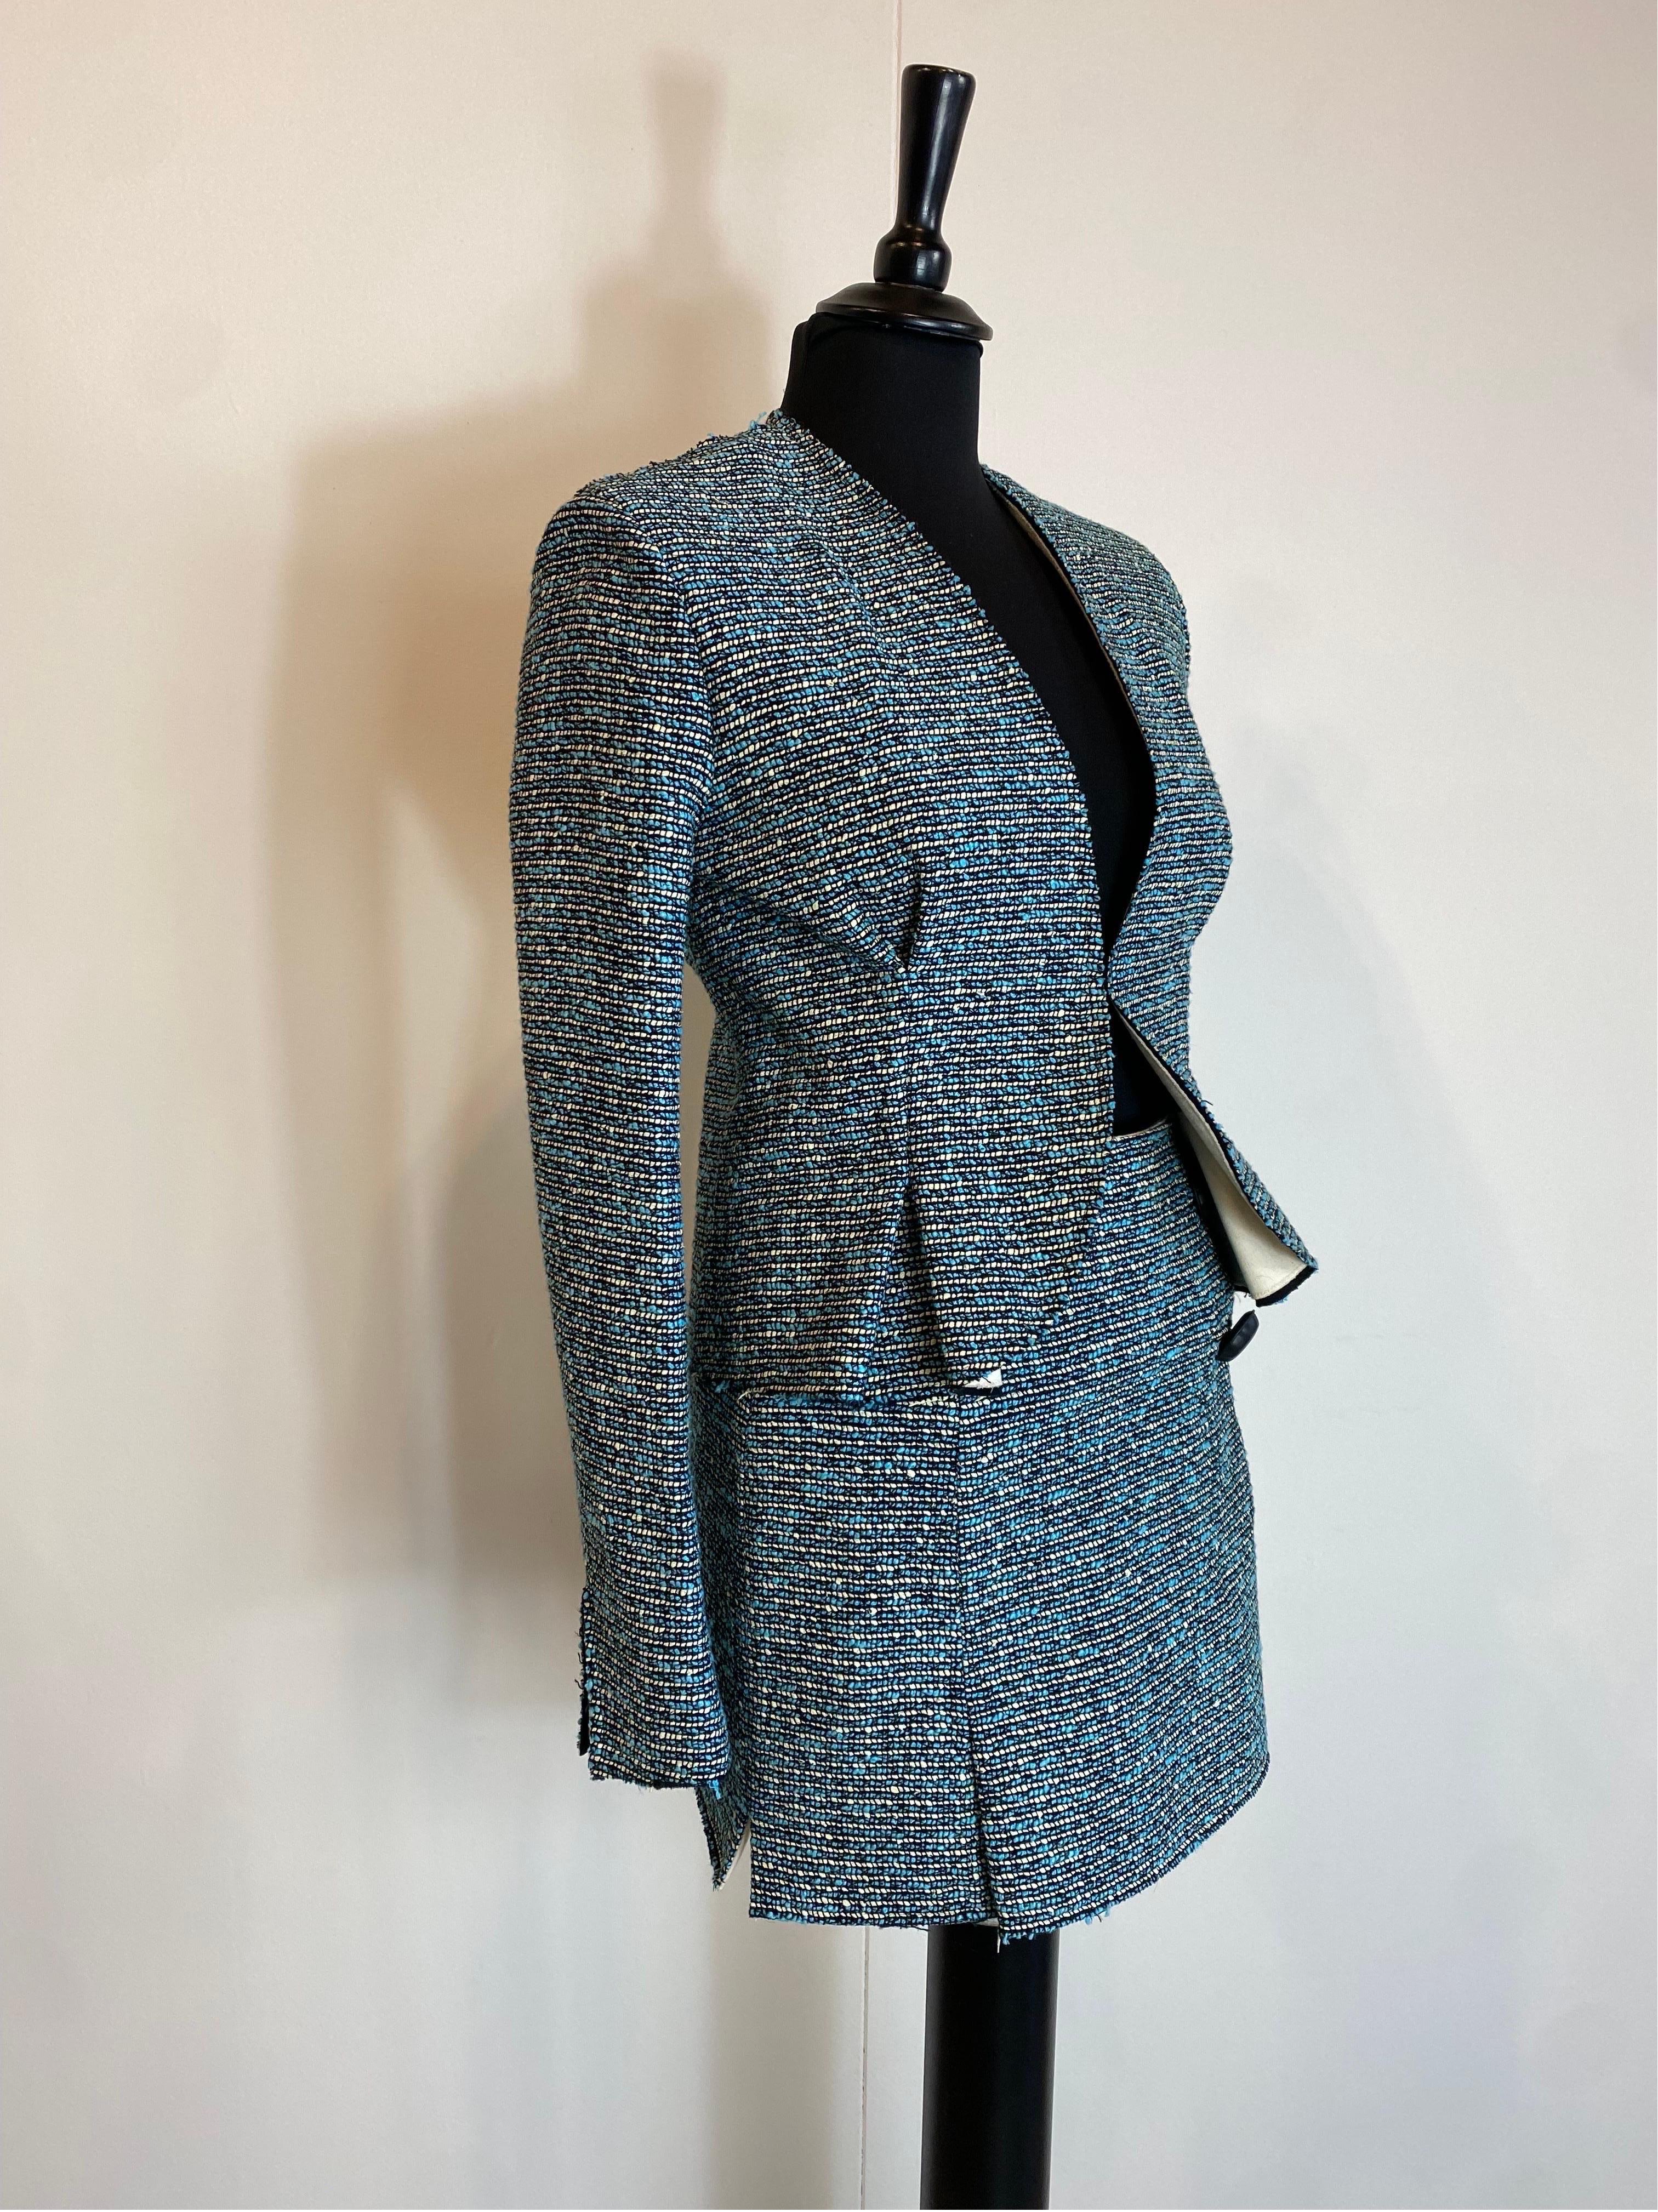 Balenciaga SS 13 Jacket and Skirt Suit For Sale 1